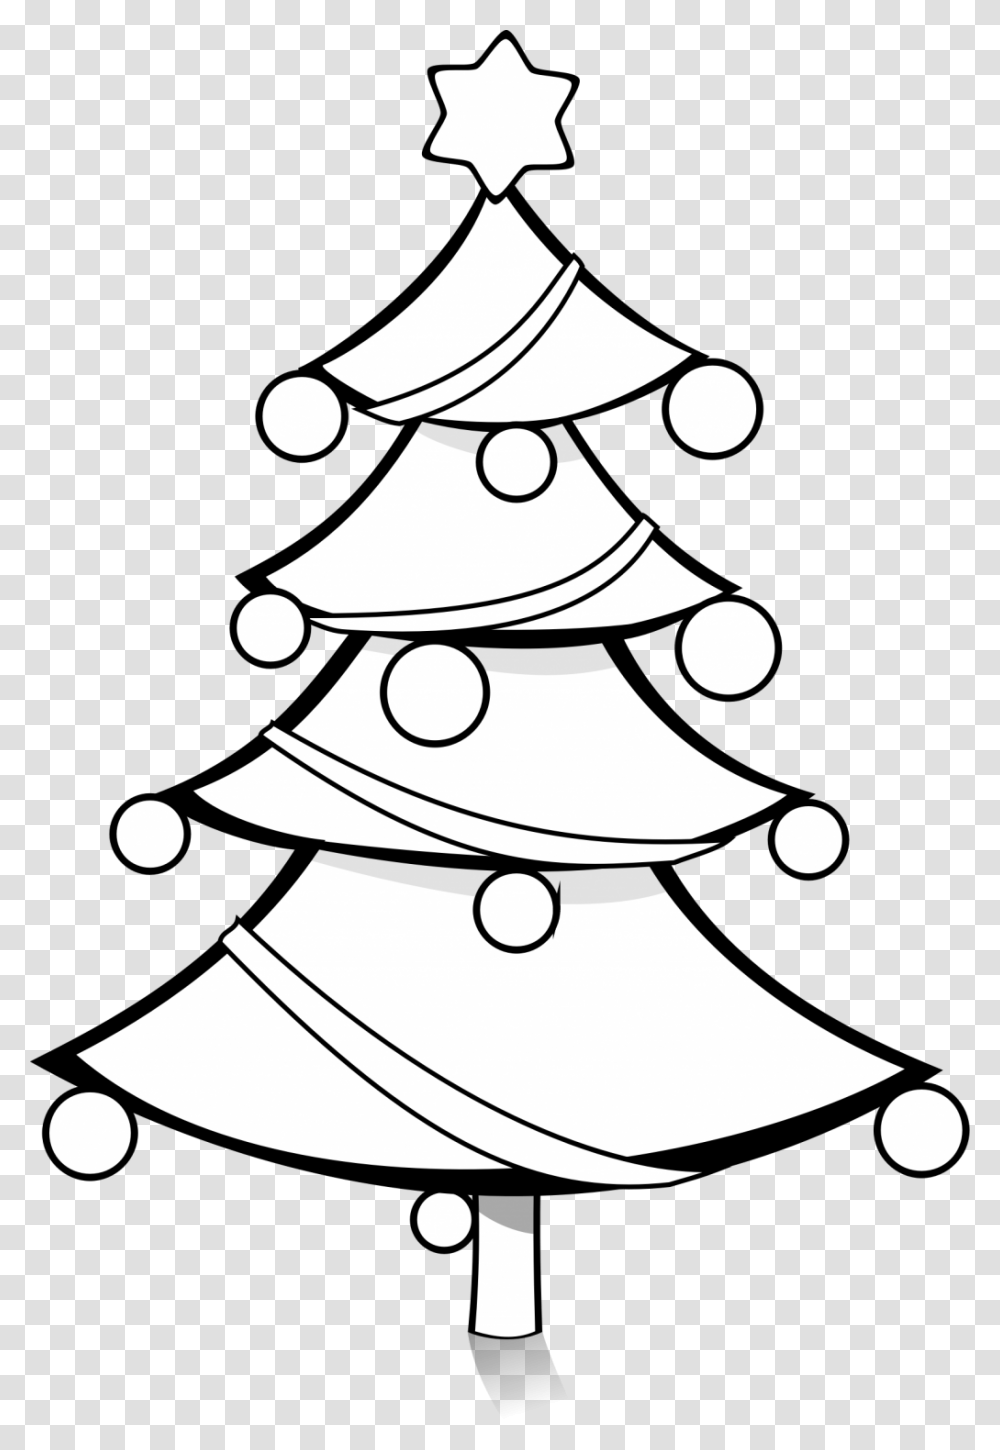 Absorbing Tree Decorations Tree Outline Black Download Free Clip, Plant, Ornament, Christmas Tree, Star Symbol Transparent Png